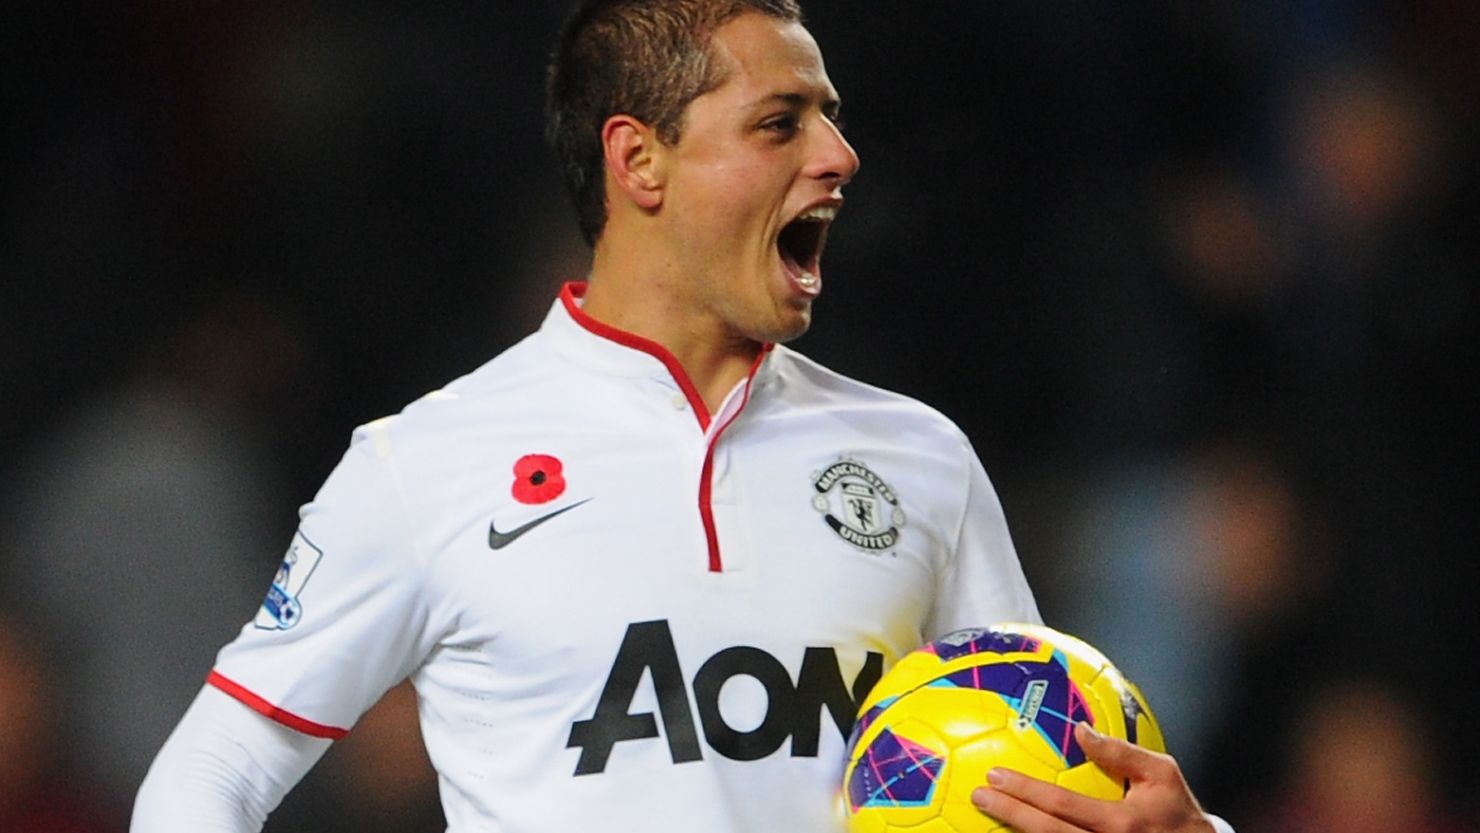 Mexico striker Javier Hernandez claimed the game ball after his match-winning heroics for  Manchester United at Villa Park on Saturday.